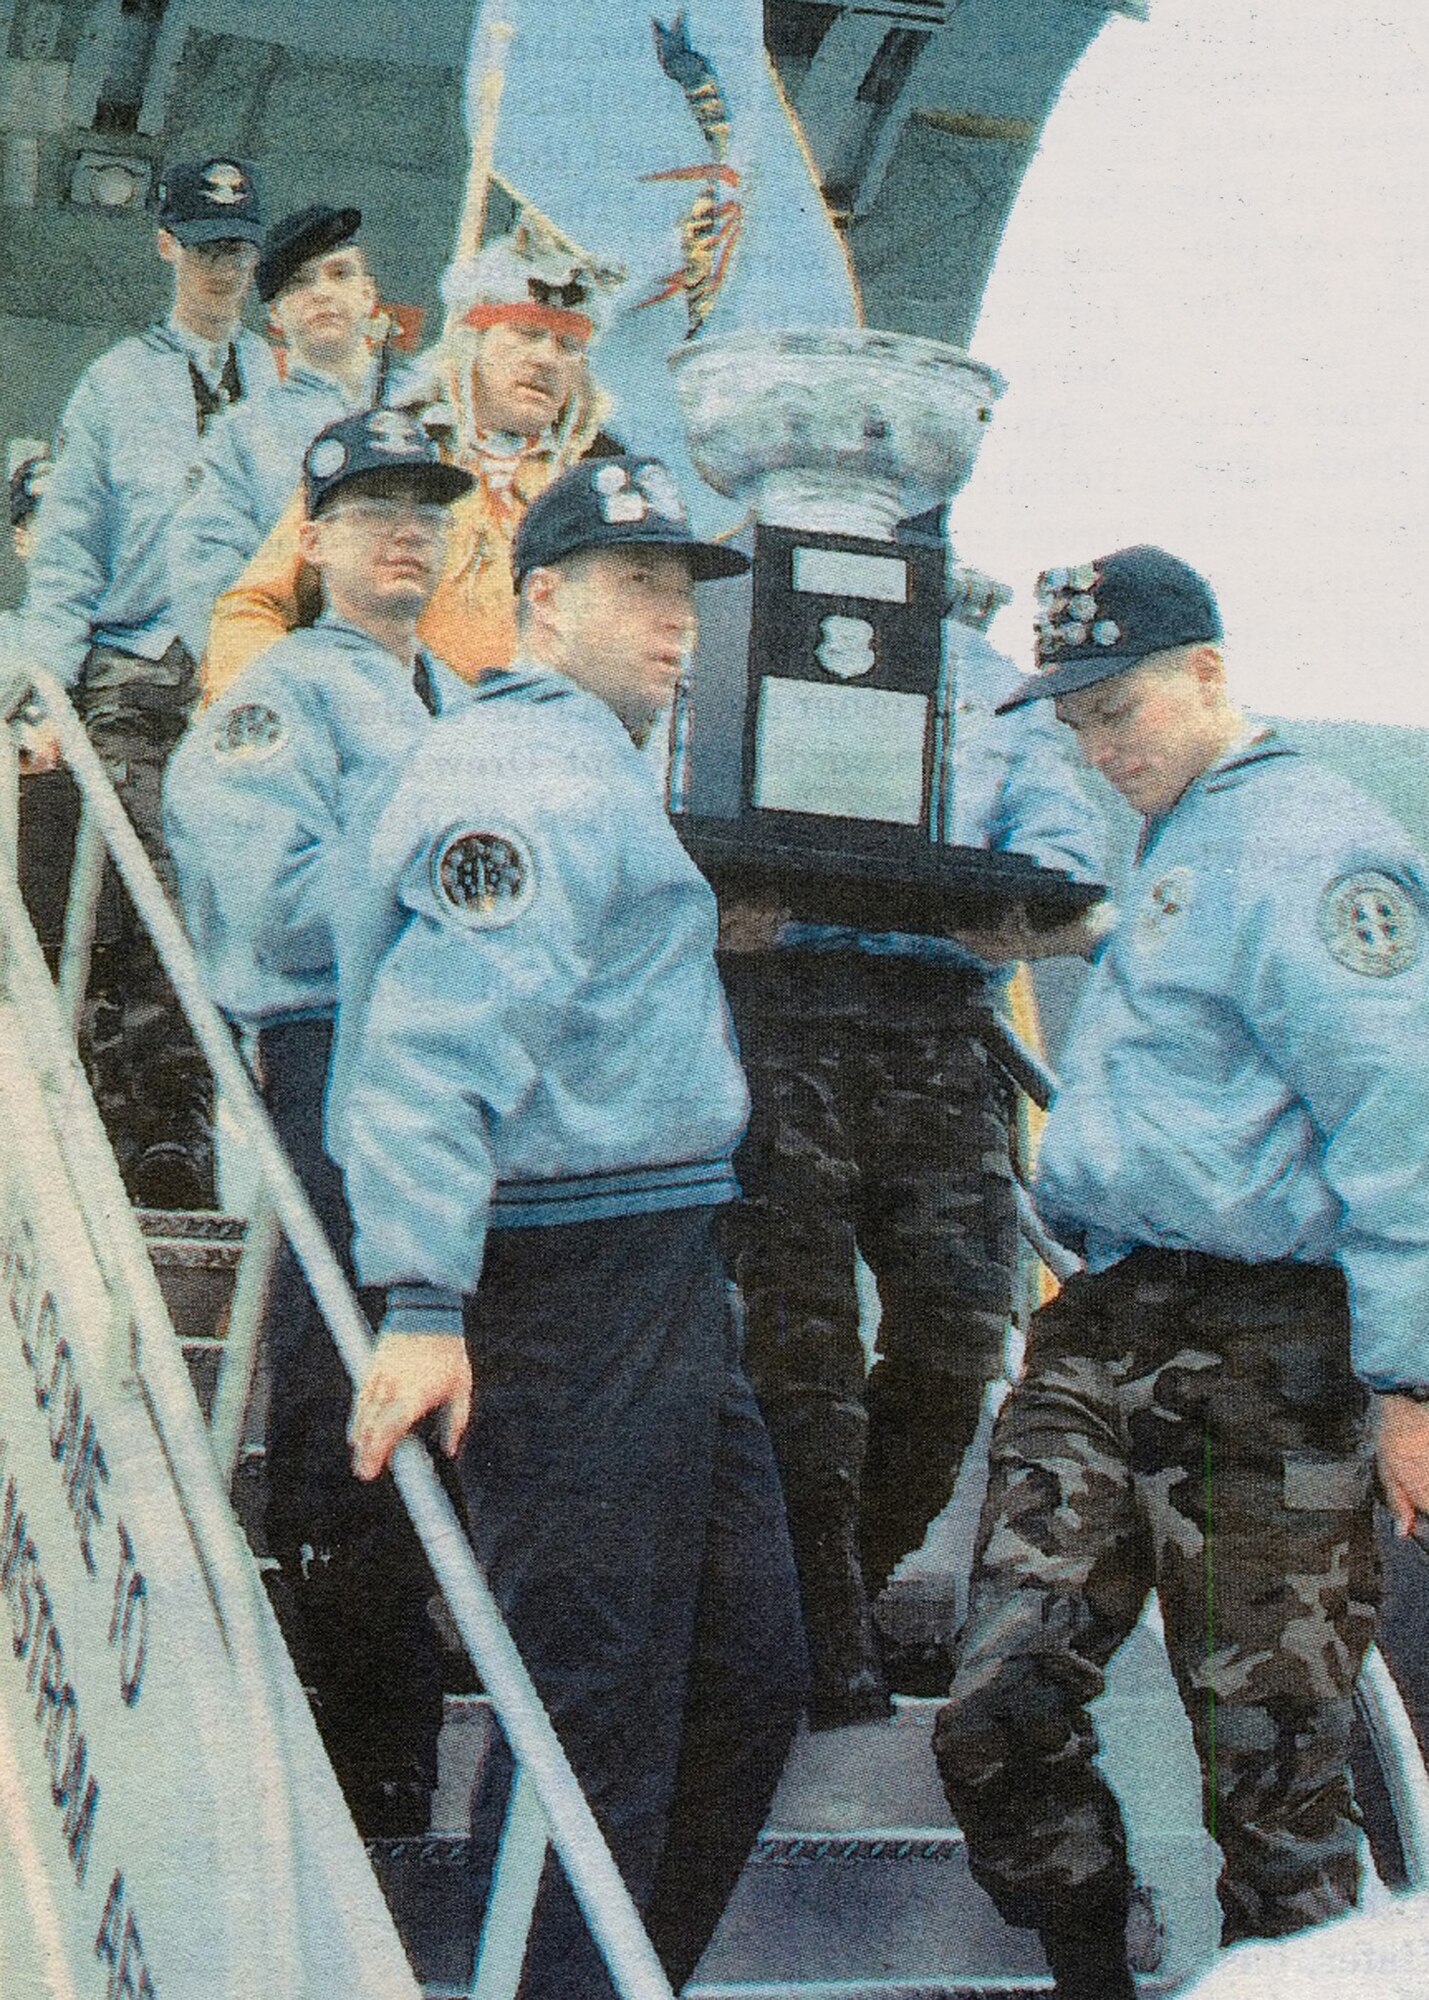 In 1991, the 341st Strategic Missile Wing became the first wing to win in two consecutive years the Blanchard Trophy for Best Intercontinental Ballistic Missile Wing. The wing’s mascot, known officially as the High Plains Warrior, helped bring the trophy back to Malmstrom Air Force Base, Mont., that year from Strategic Air Command’s Olympic Arena Missile Combat Competition at Vandenberg AFB, Calif. (Photo courtesy of 341st MW Historian Office)